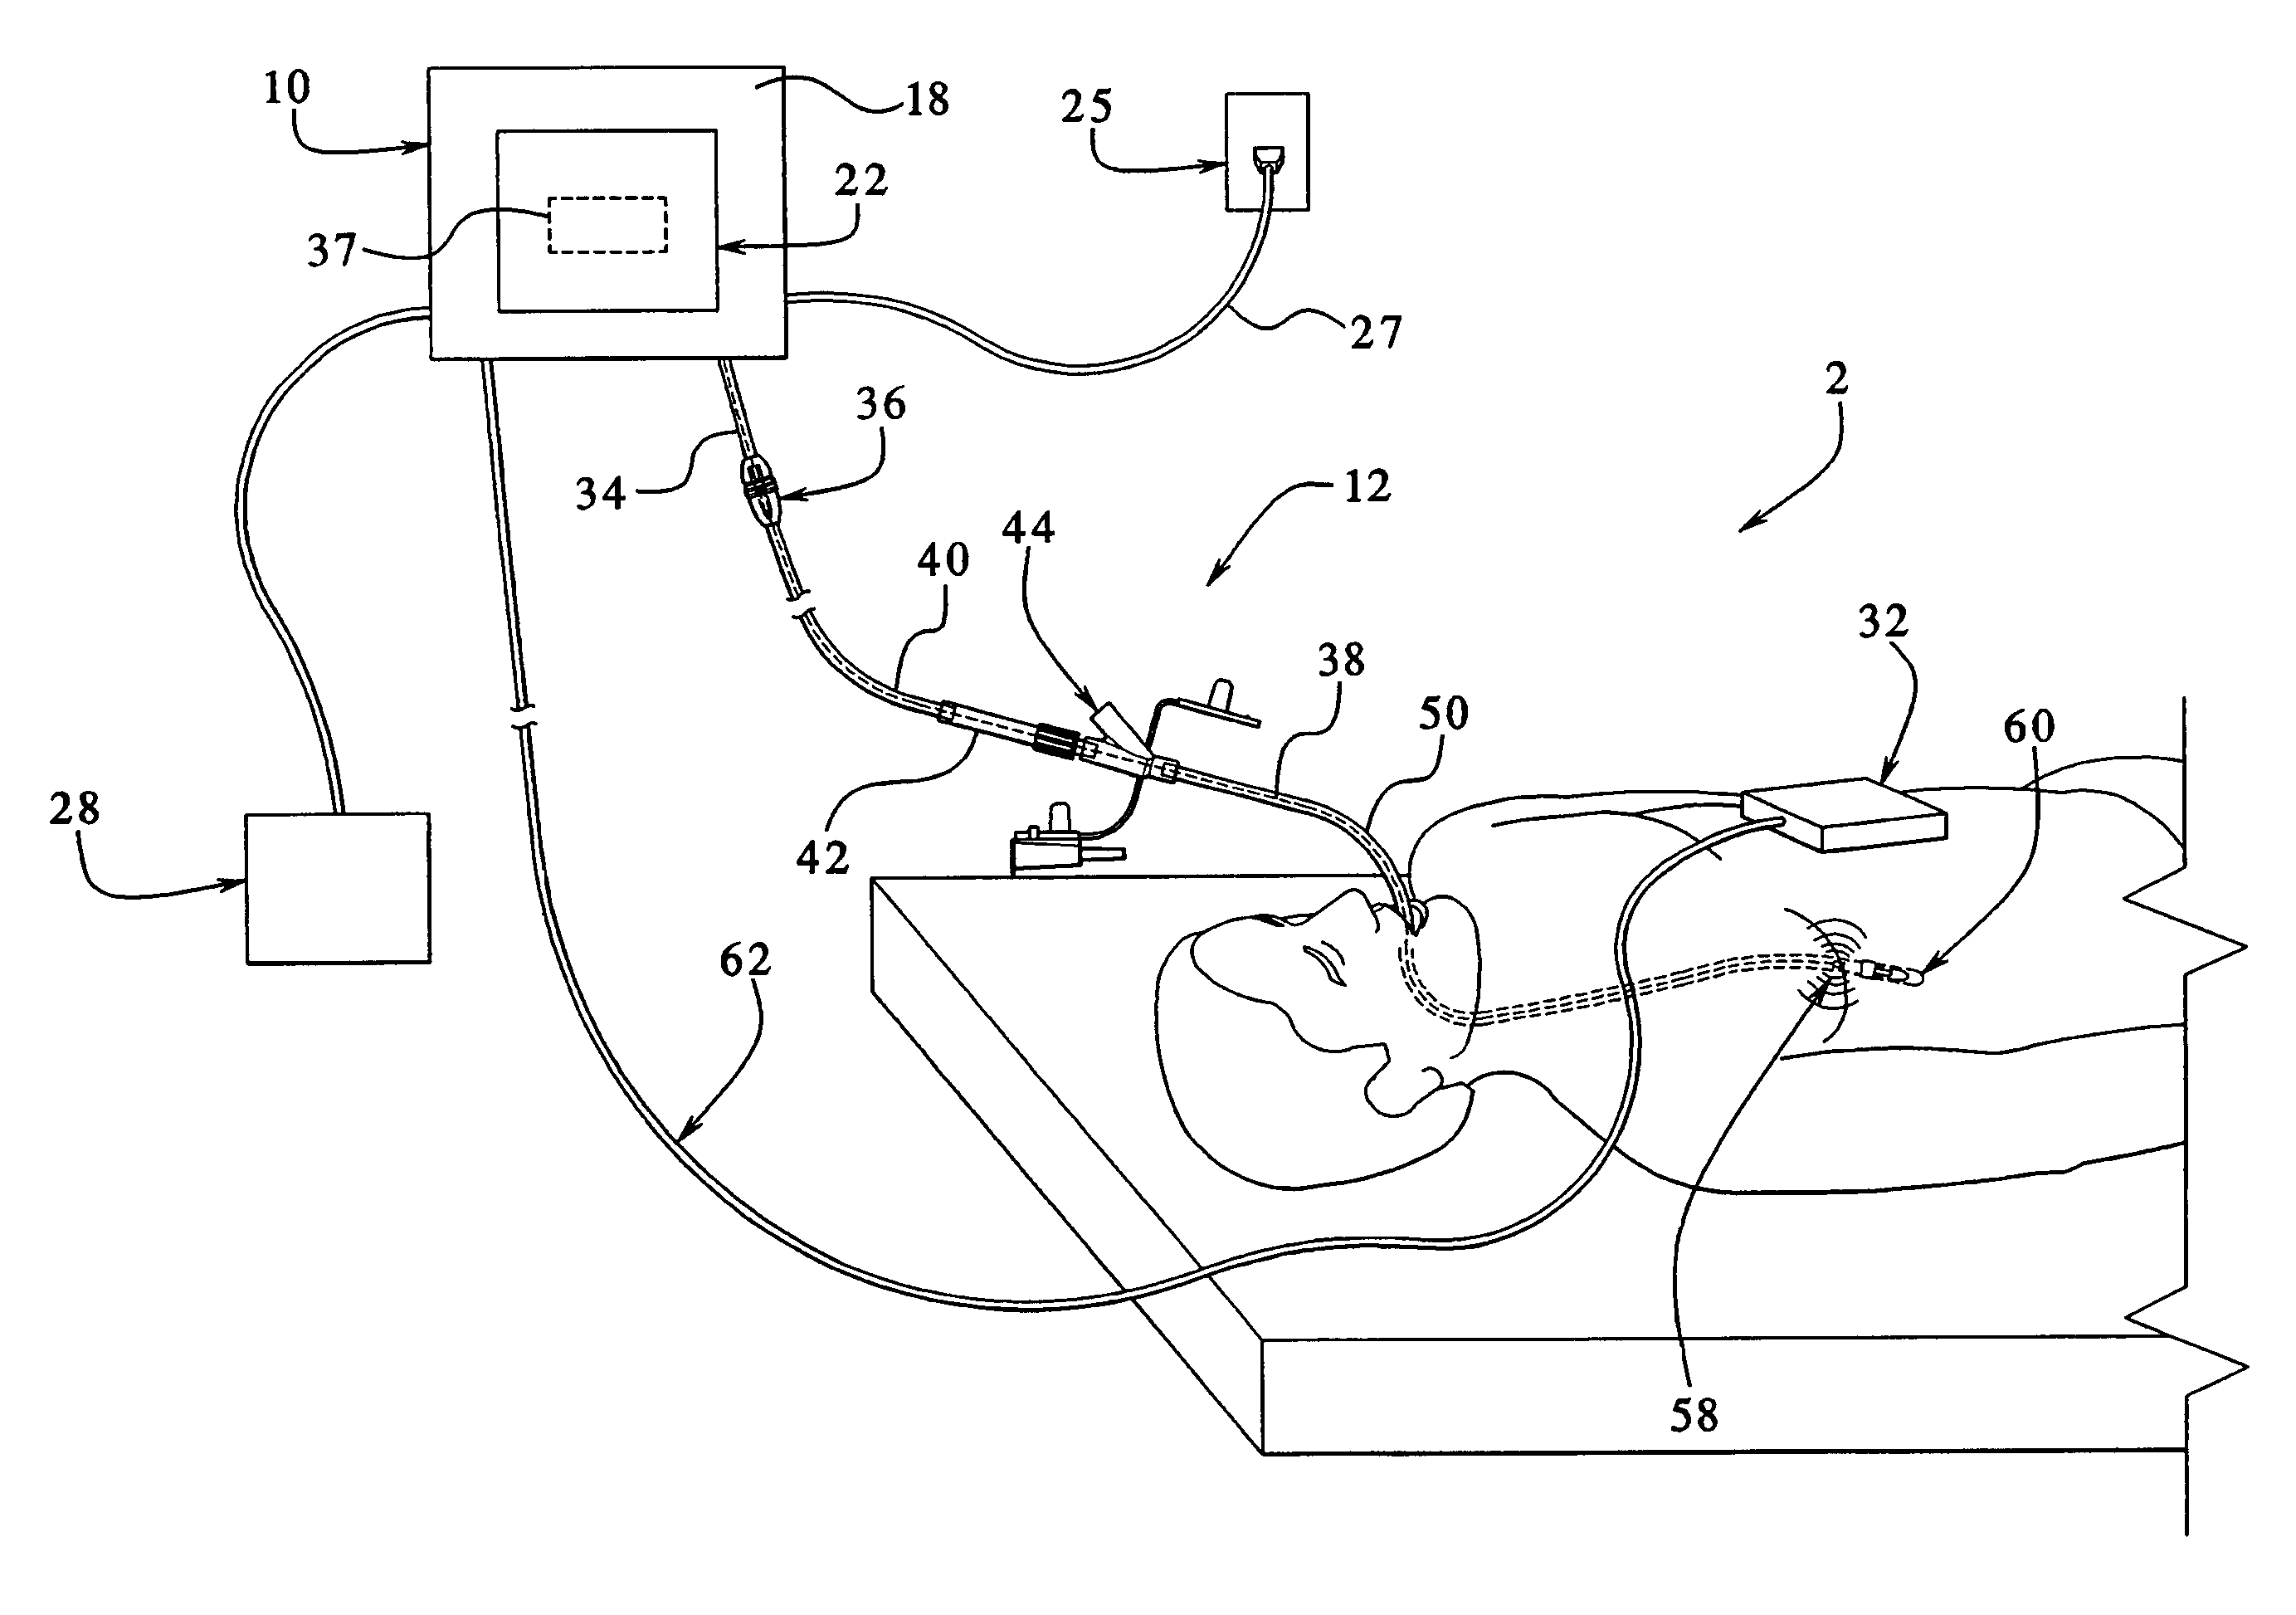 Tubing assembly and signal generator placement control device and method for use with catheter guidance systems